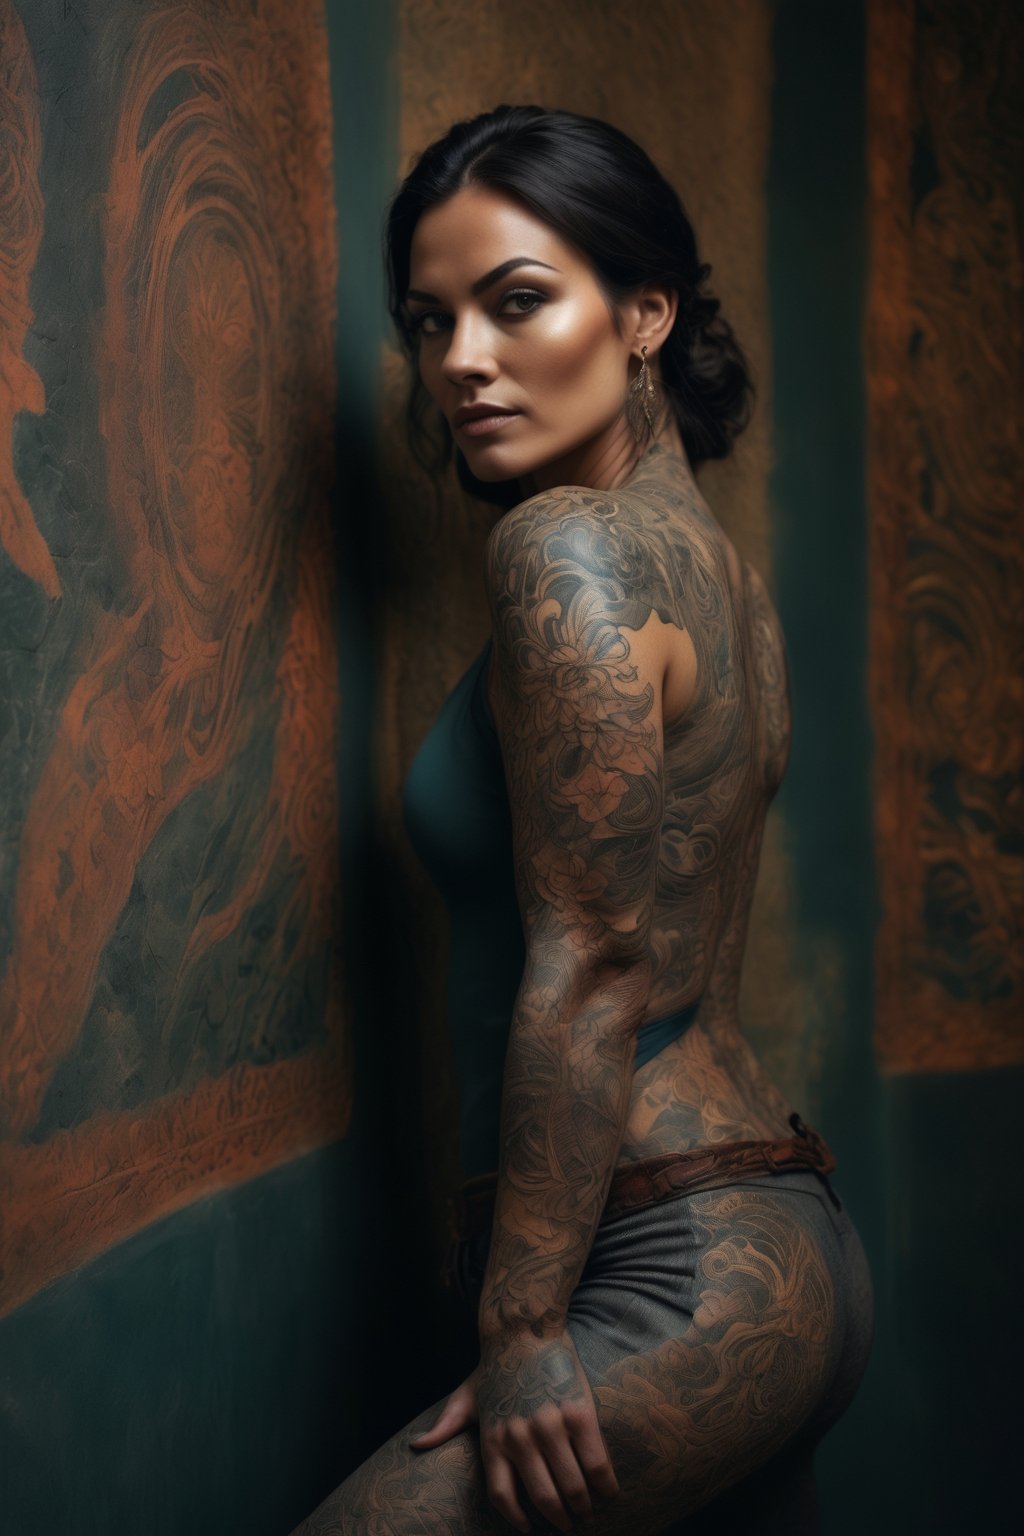 Photo of a woman in front of a wall. Her detailed tattoo appears to seamlessly continue onto the wall creating a fusion of art and environment. cinematic style